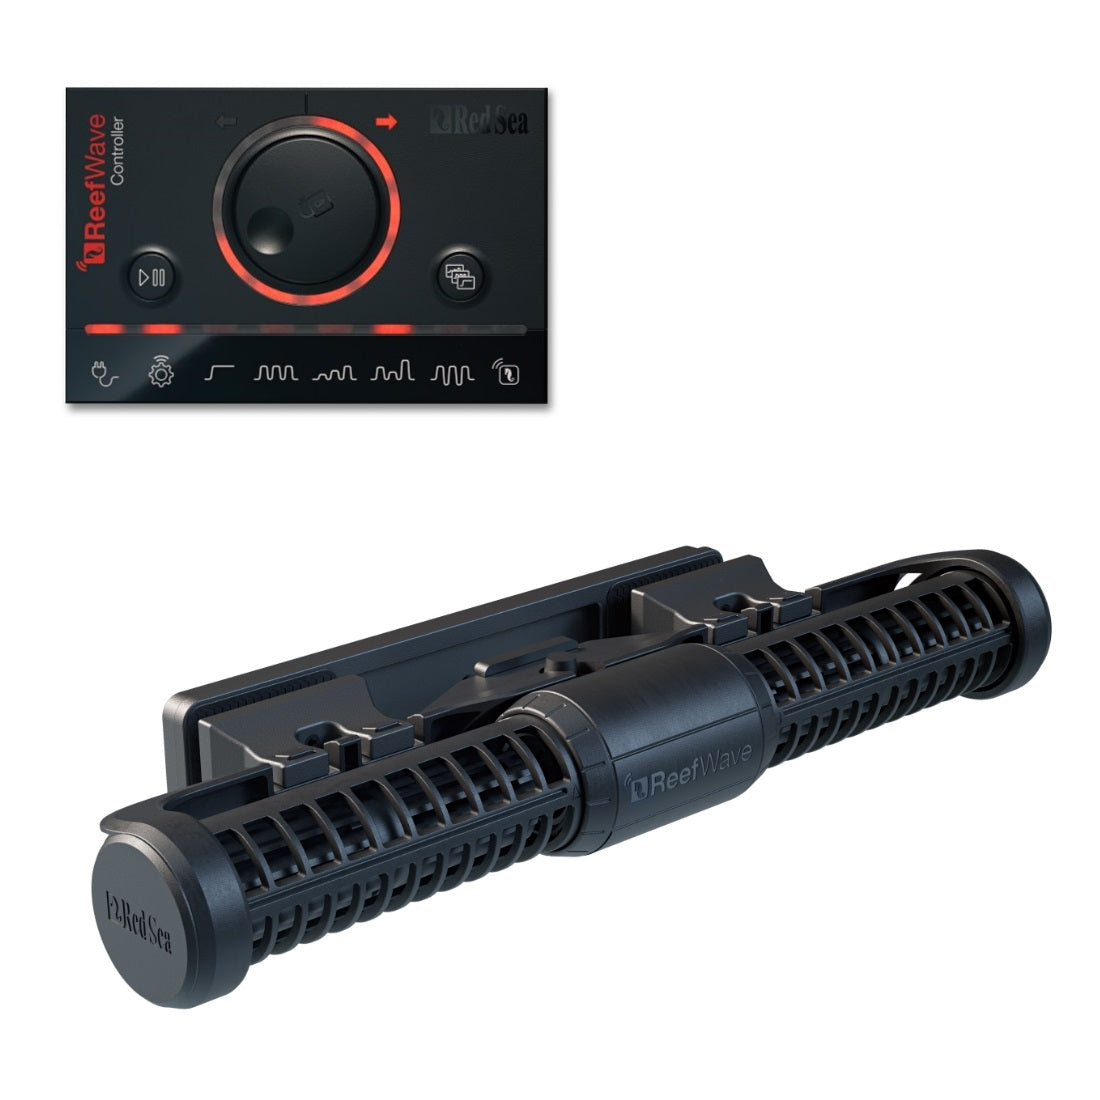 Red sea ReefWave® Silent - Smart - Powerful 25